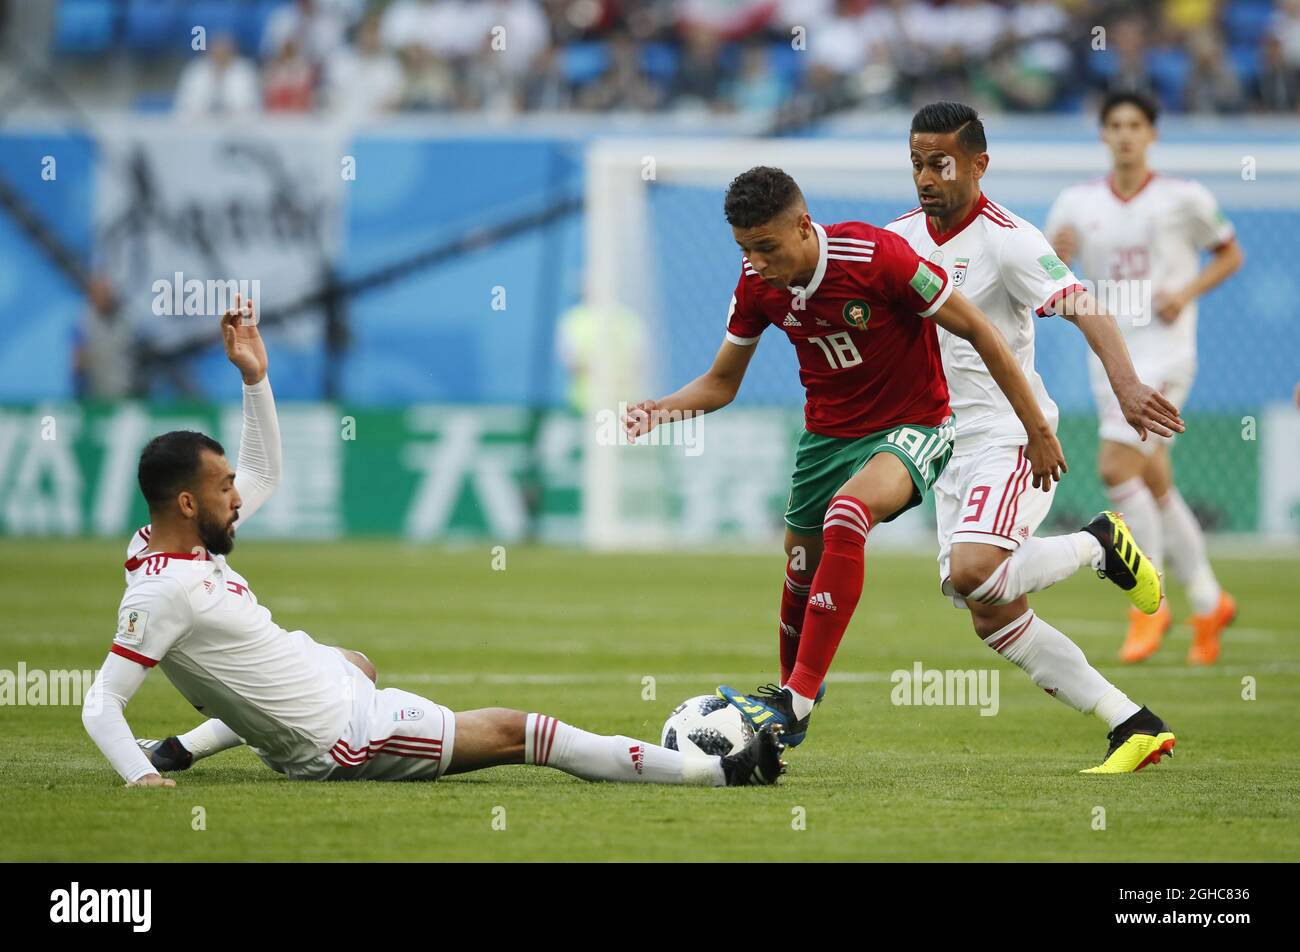 Roozbeh Cheshmi of IR Iran tackles Amine Harit of Morocco during the FIFA World Cup 2018 Group B match at the St Petersburg Stadium, St Petersburg. Picture date 15th June 2018. Picture credit should read: David Klein/Sportimage via PA Images Stock Photo